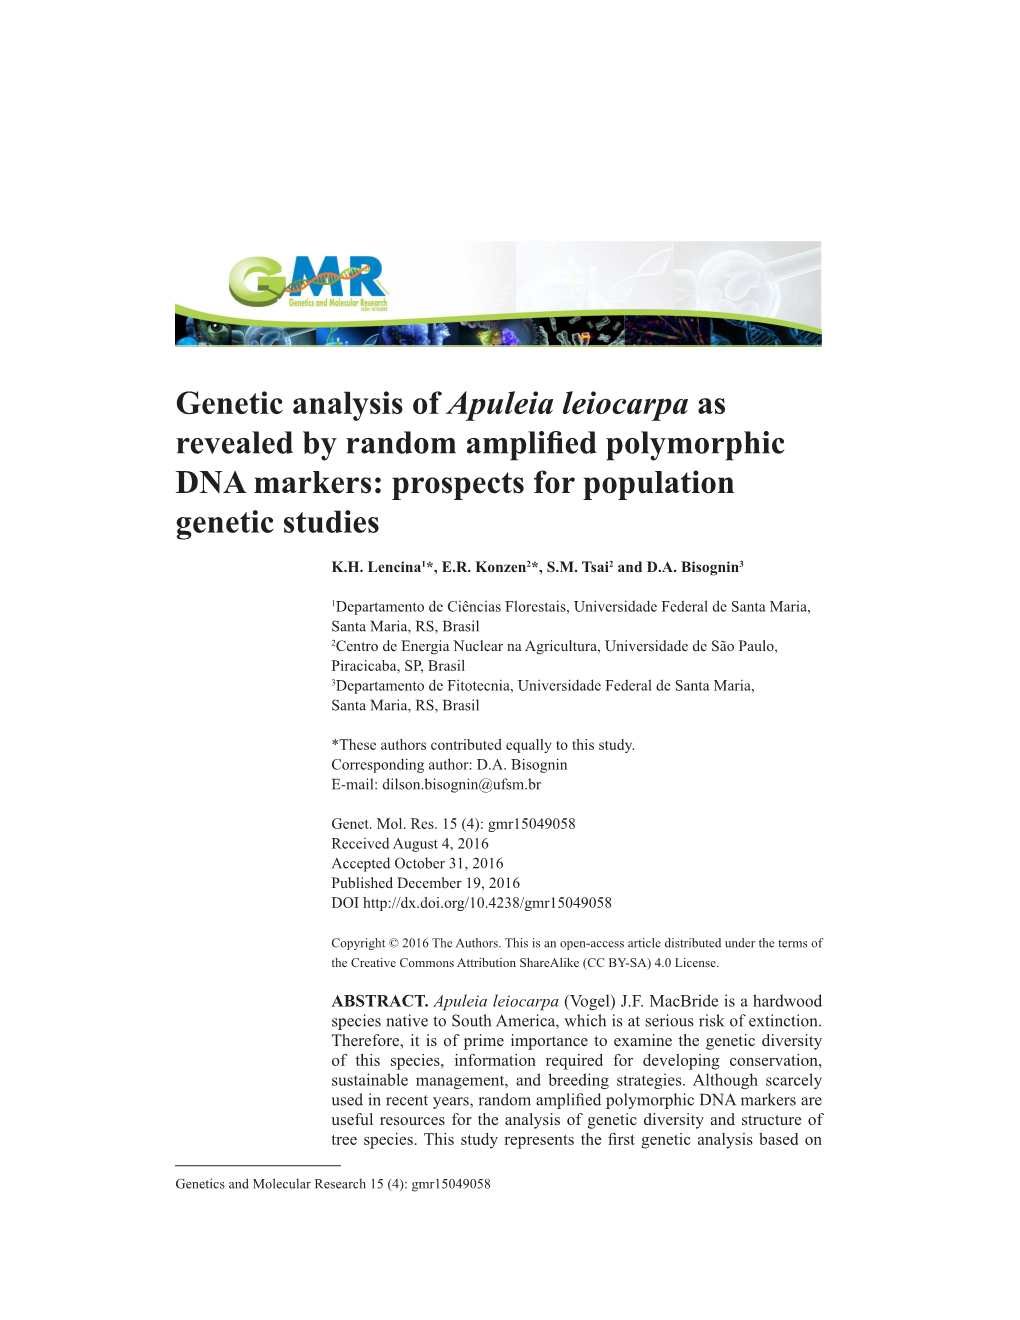 Genetic Analysis of Apuleia Leiocarpa As Revealed by Random Amplified Polymorphic DNA Markers: Prospects for Population Genetic Studies